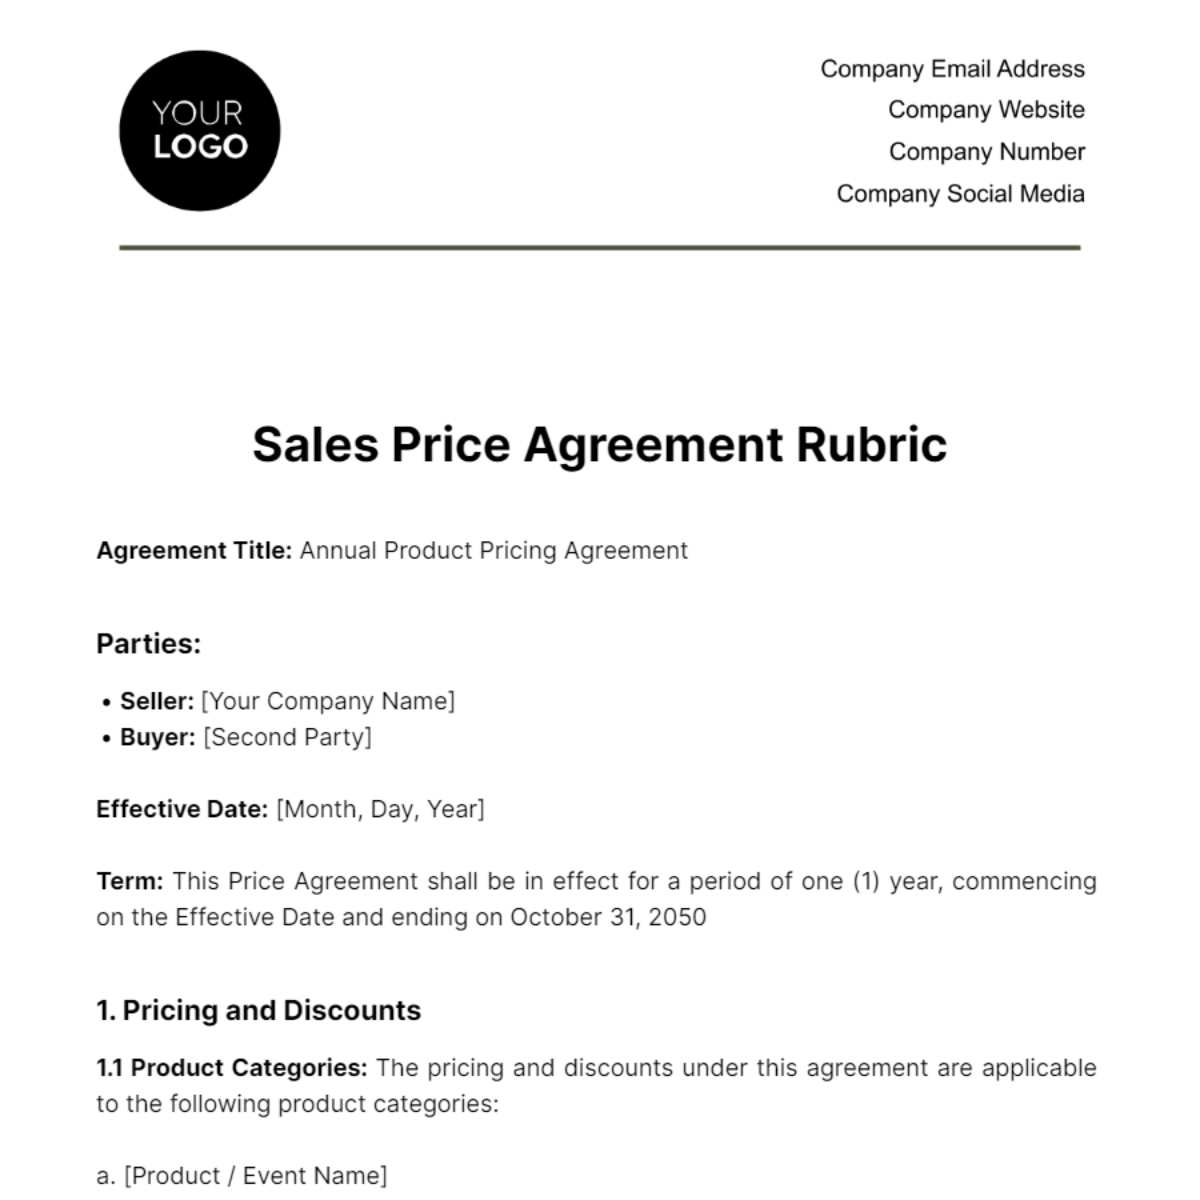 Free Sales Price Agreement Rubric Template